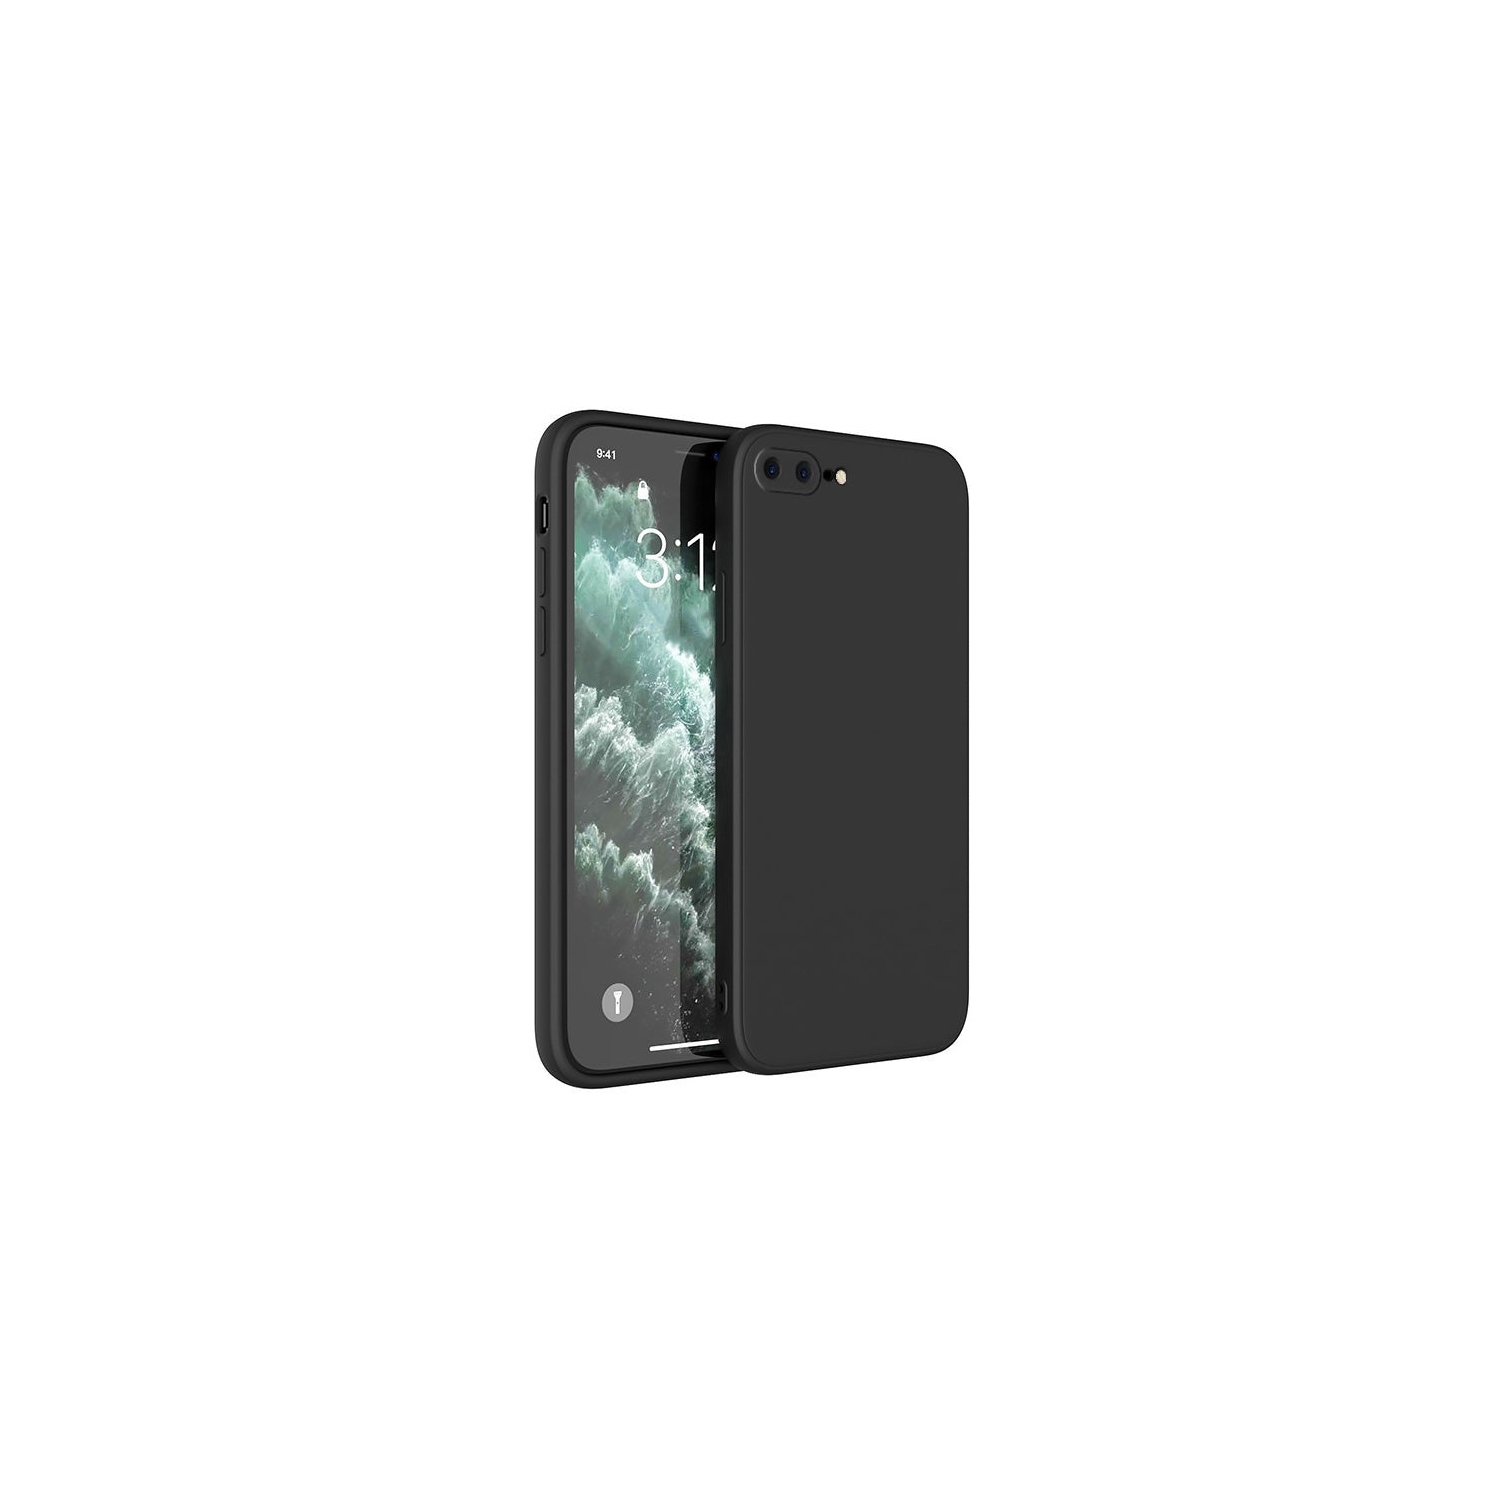 PANDACO Soft Shell Matte Black Case for iPhone 7 Plus or iPhone 8 Plus